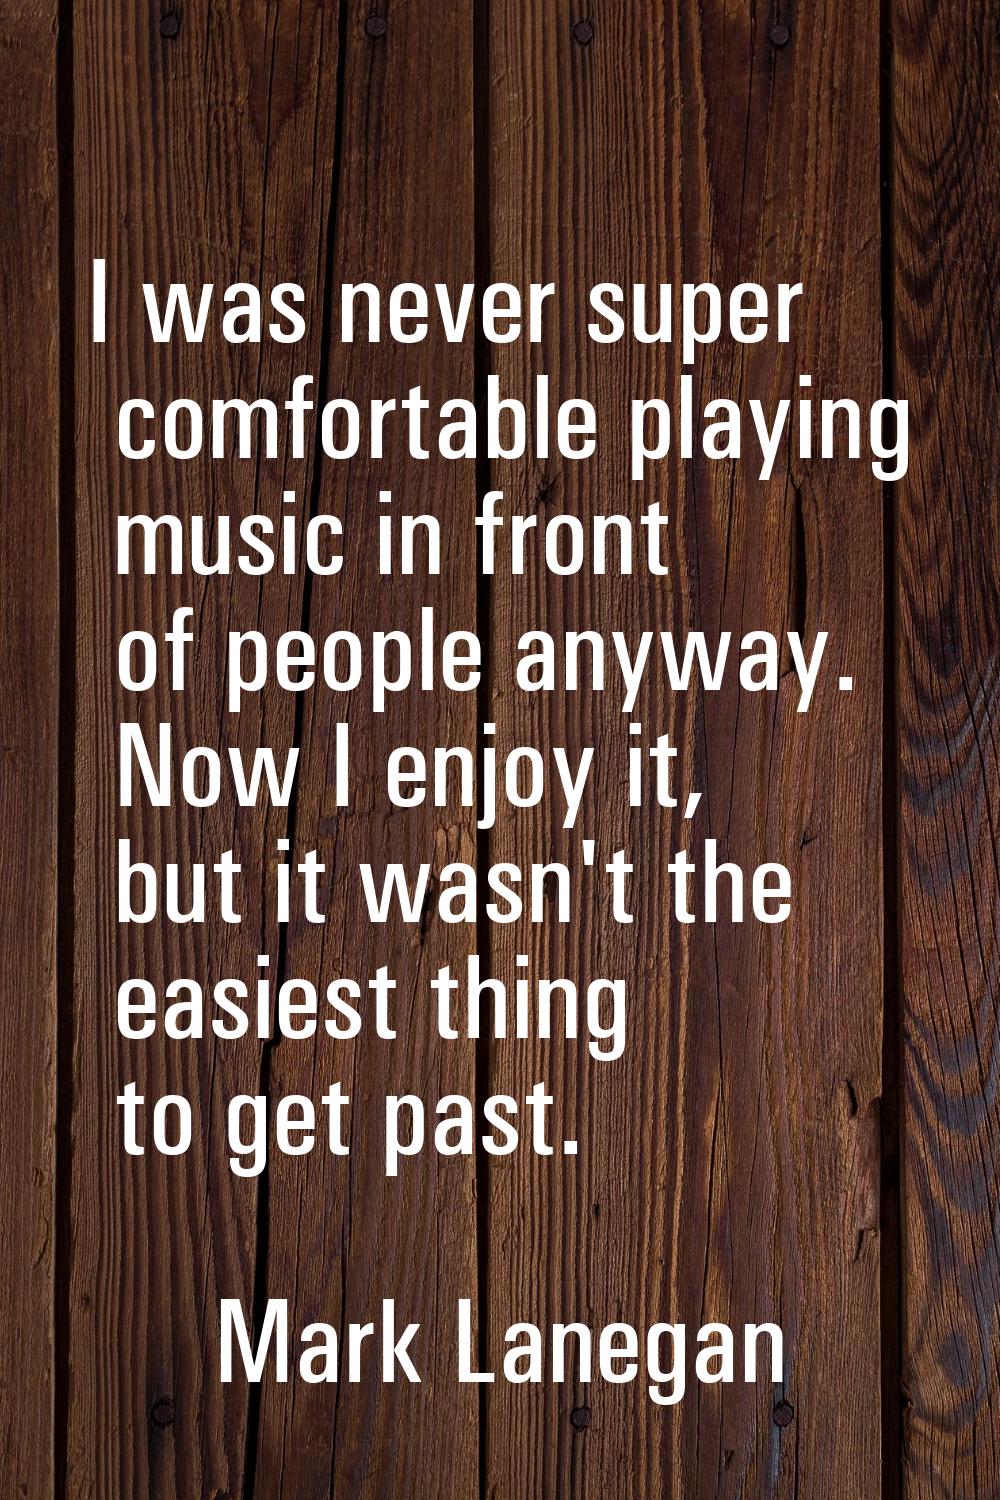 I was never super comfortable playing music in front of people anyway. Now I enjoy it, but it wasn'